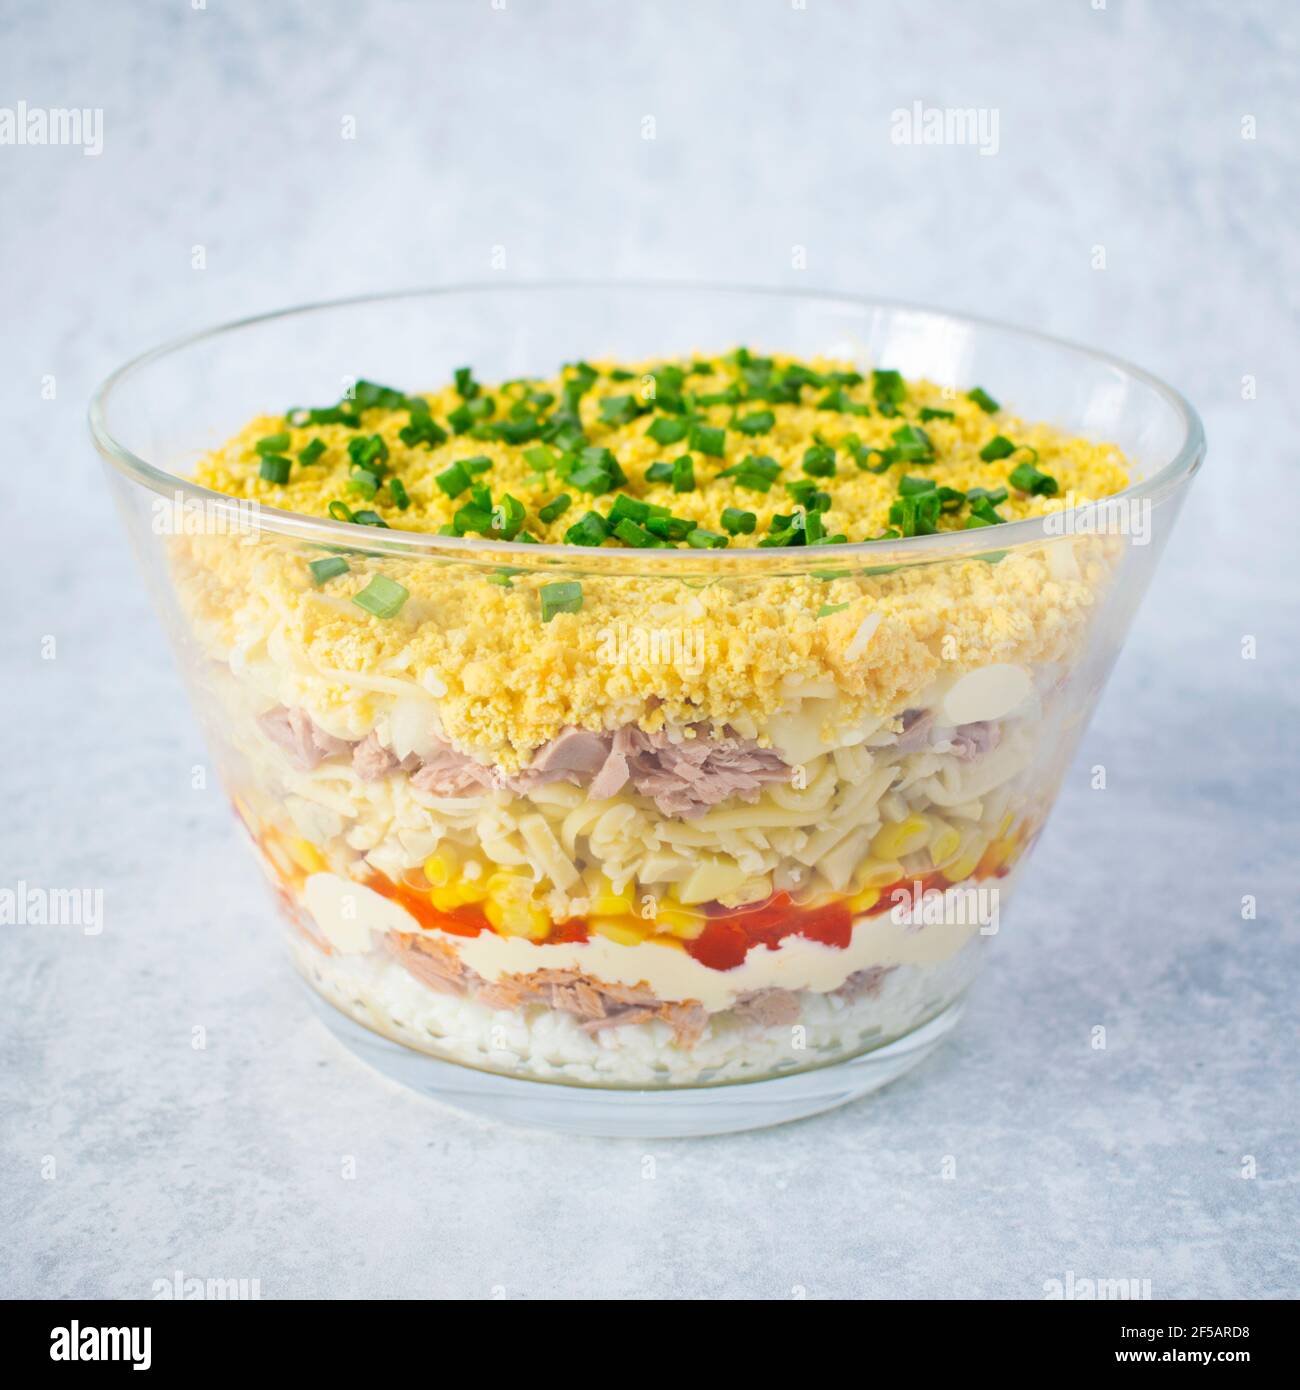 Layered salad with tuna, pickled peppers, mushrooms and cheese. Stock Photo